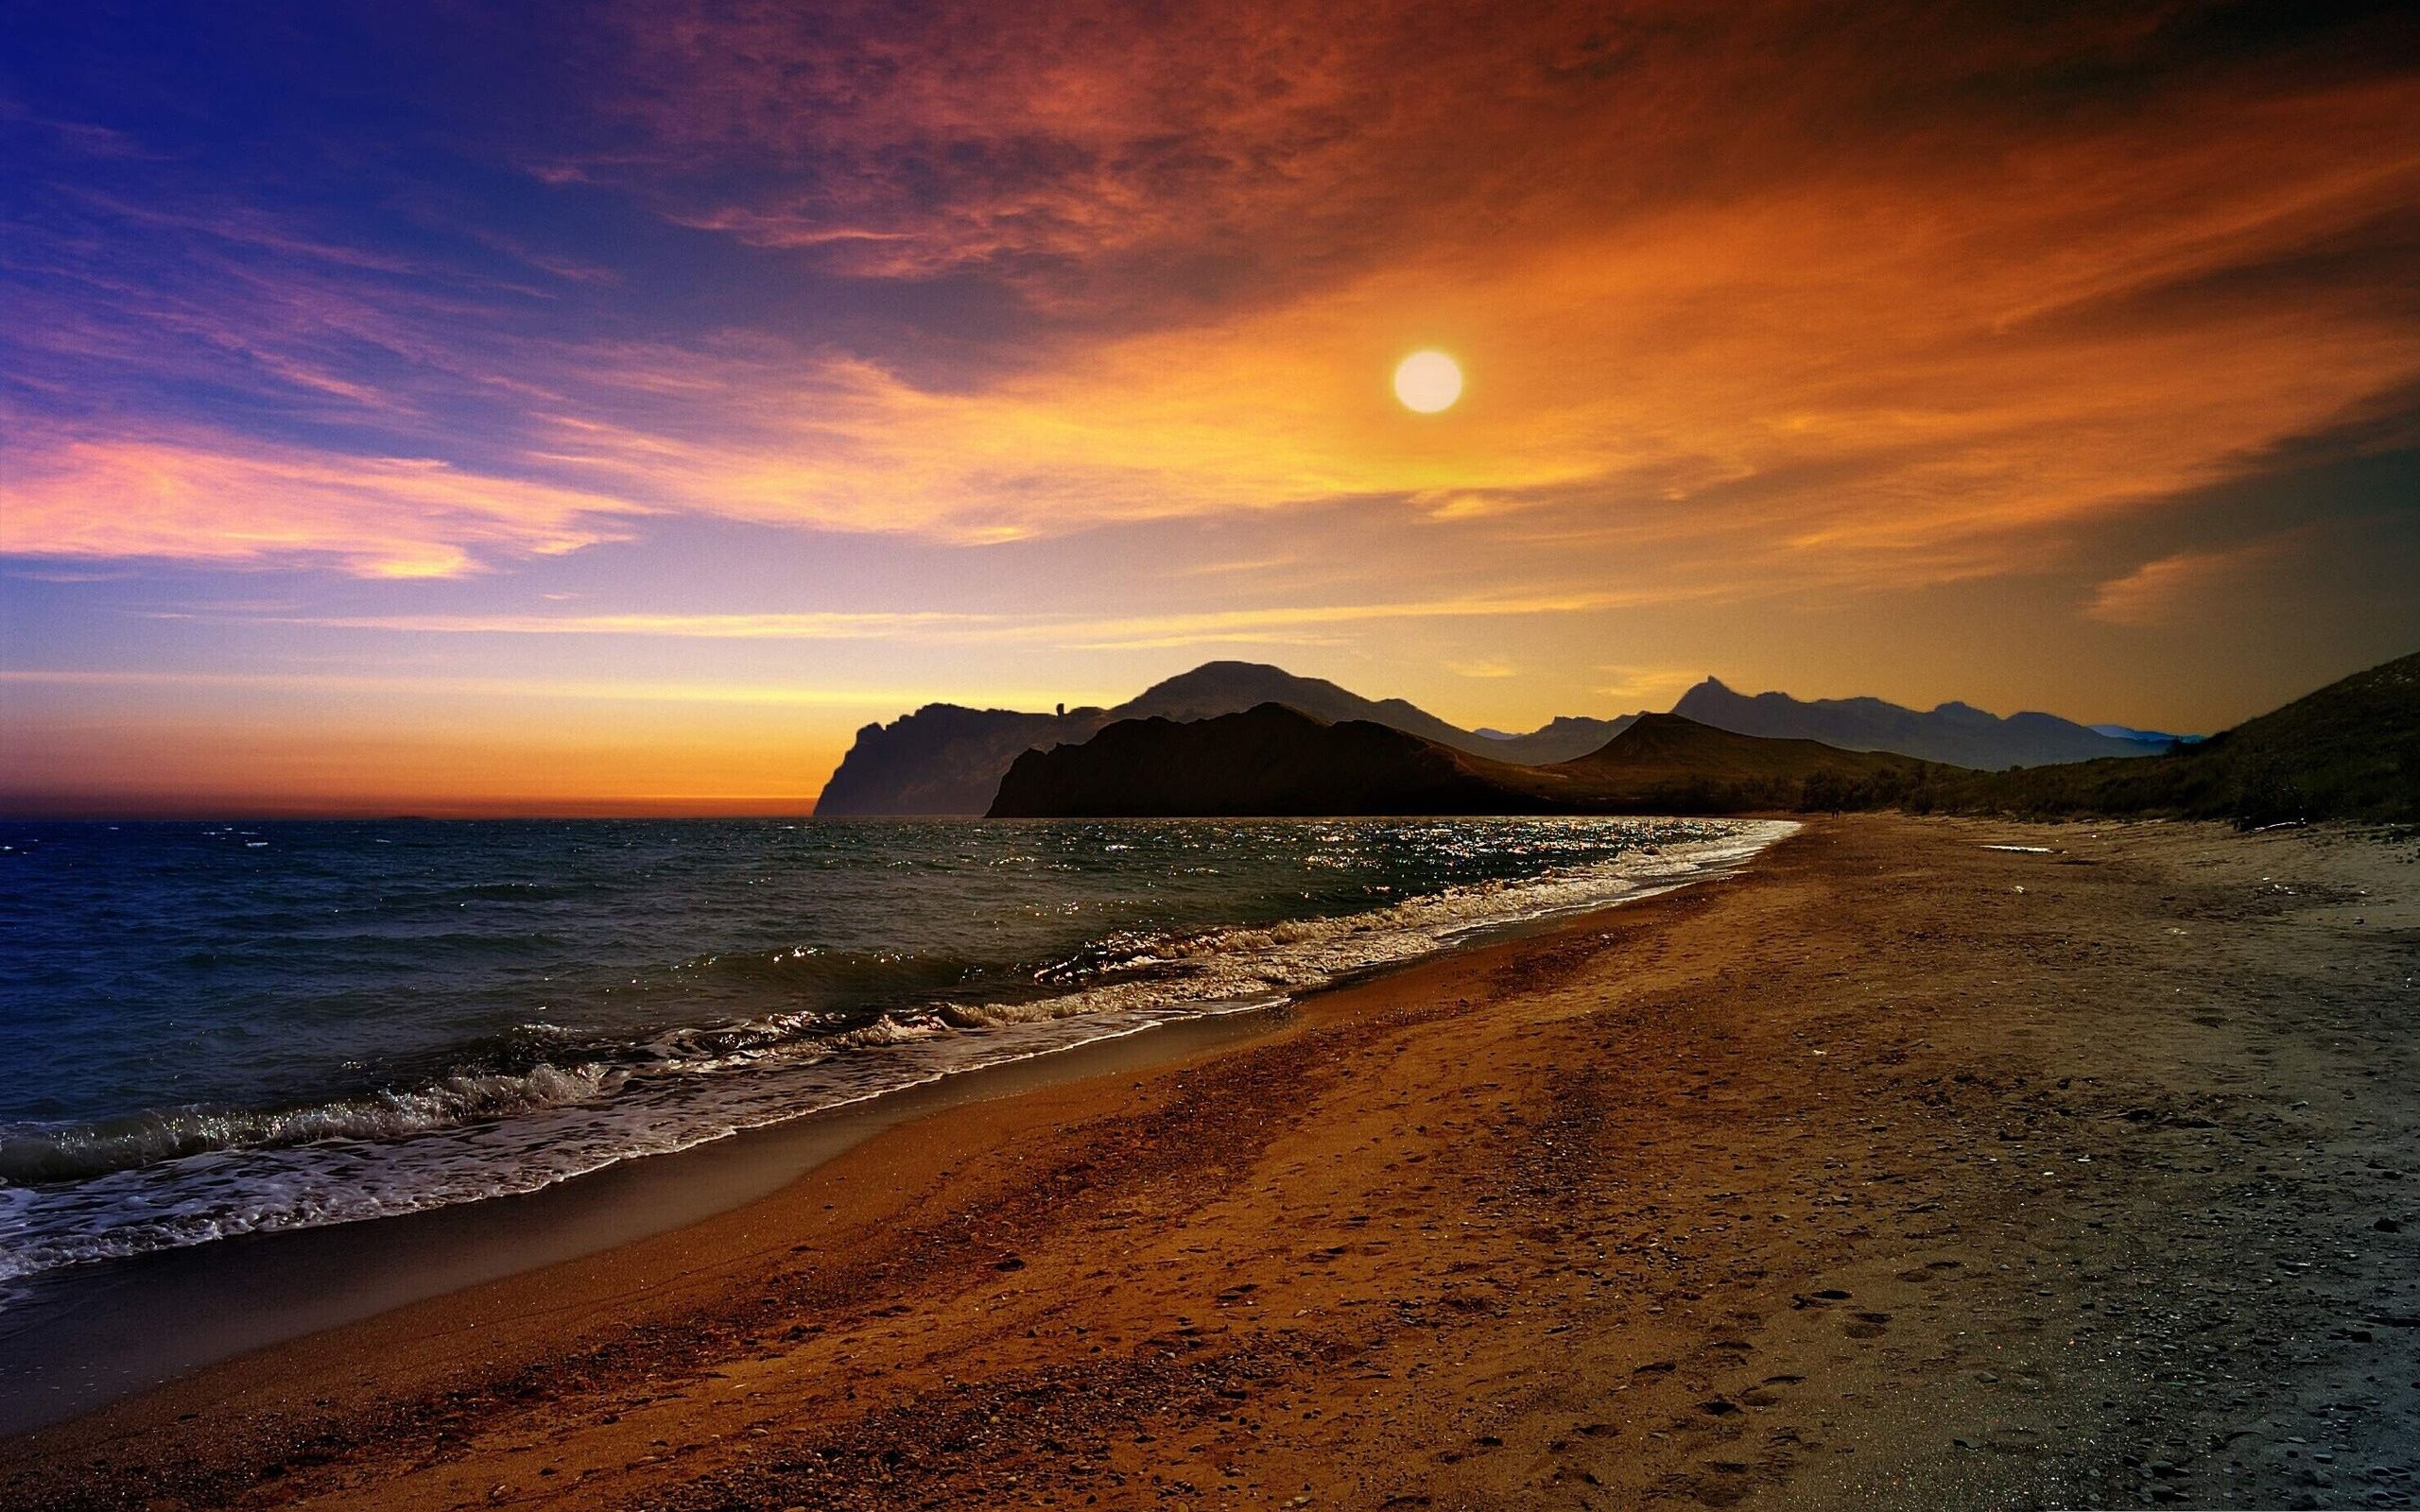 Look at the pink sunset from the beach macbook backgrounds HD wallpaper   Pxfuel